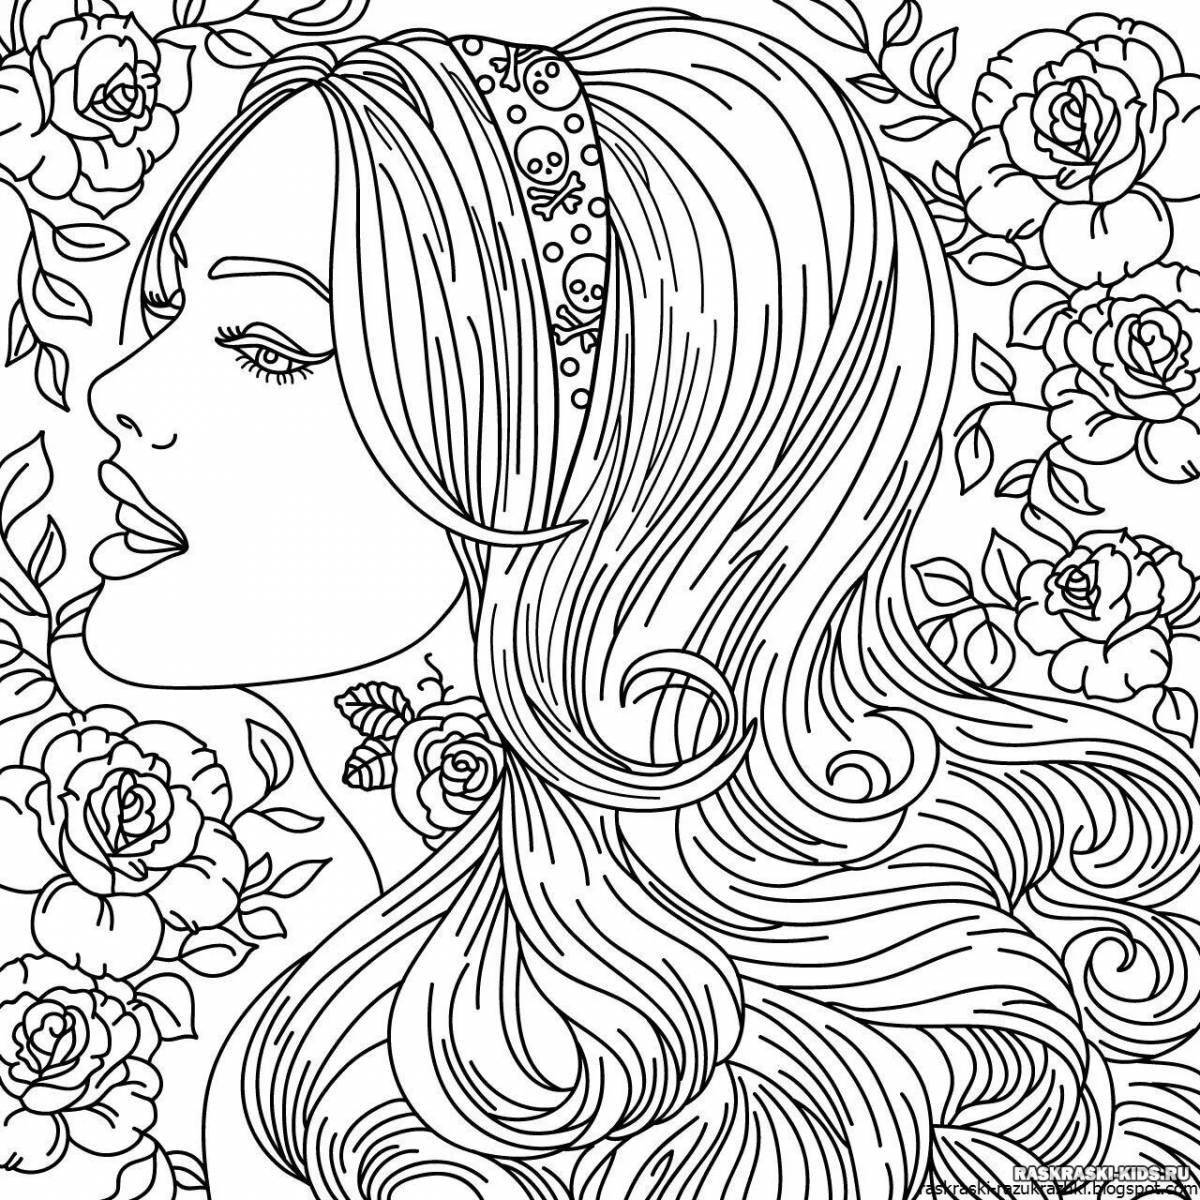 Cute anti-stress coloring book for girls 10-12 years old